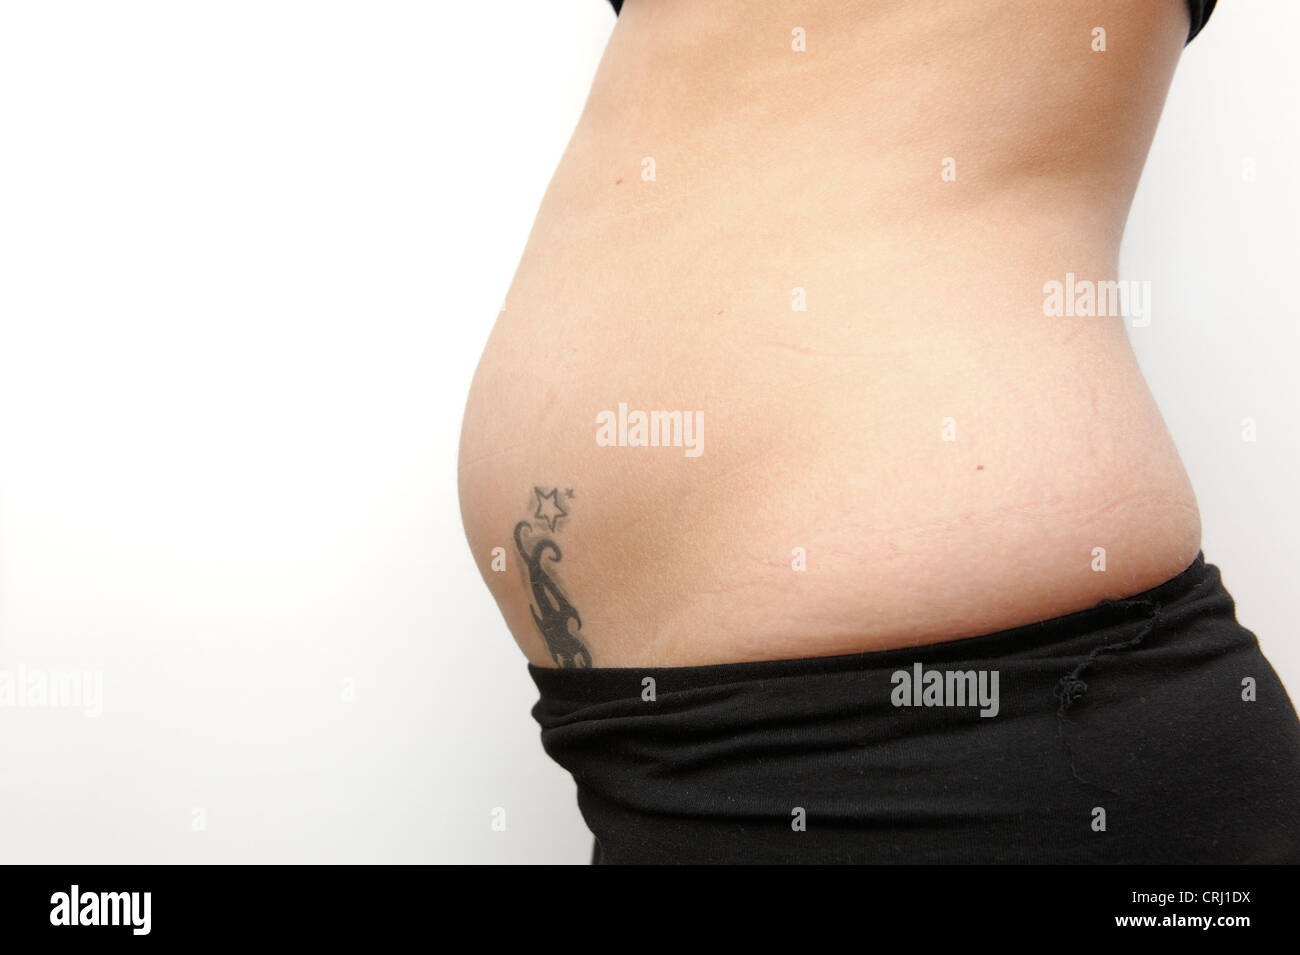 23 year old female 13 weeks pregnant Stock Photo